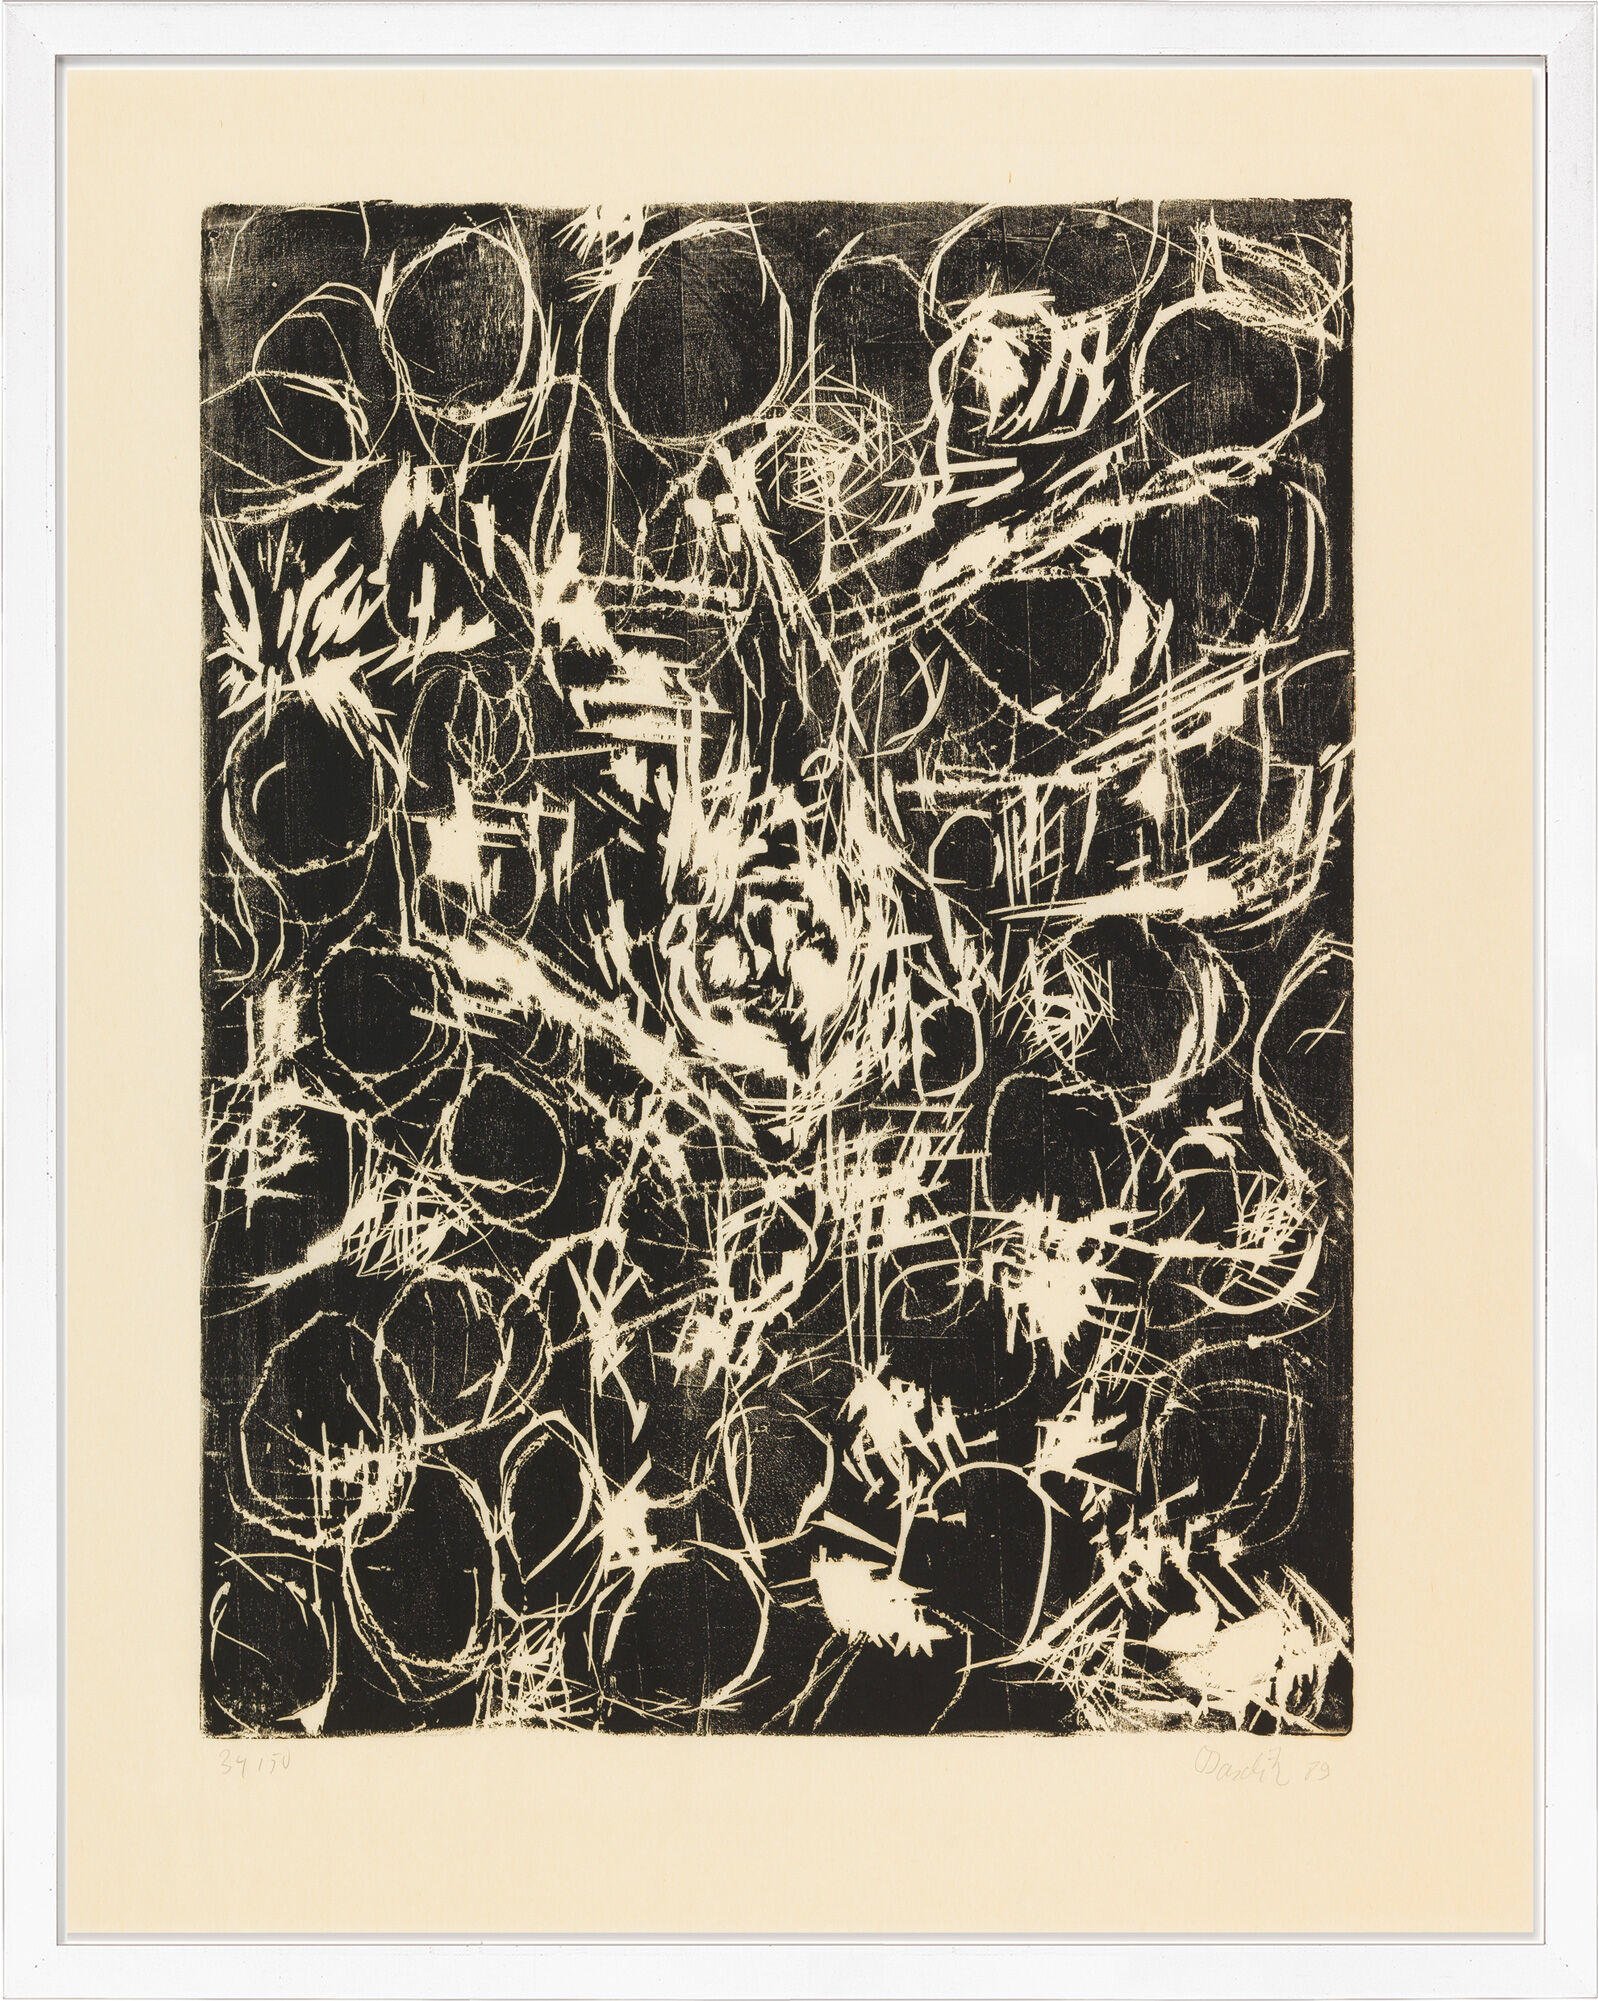 Picture "Black Cloth III" (1985/89) by Georg Baselitz